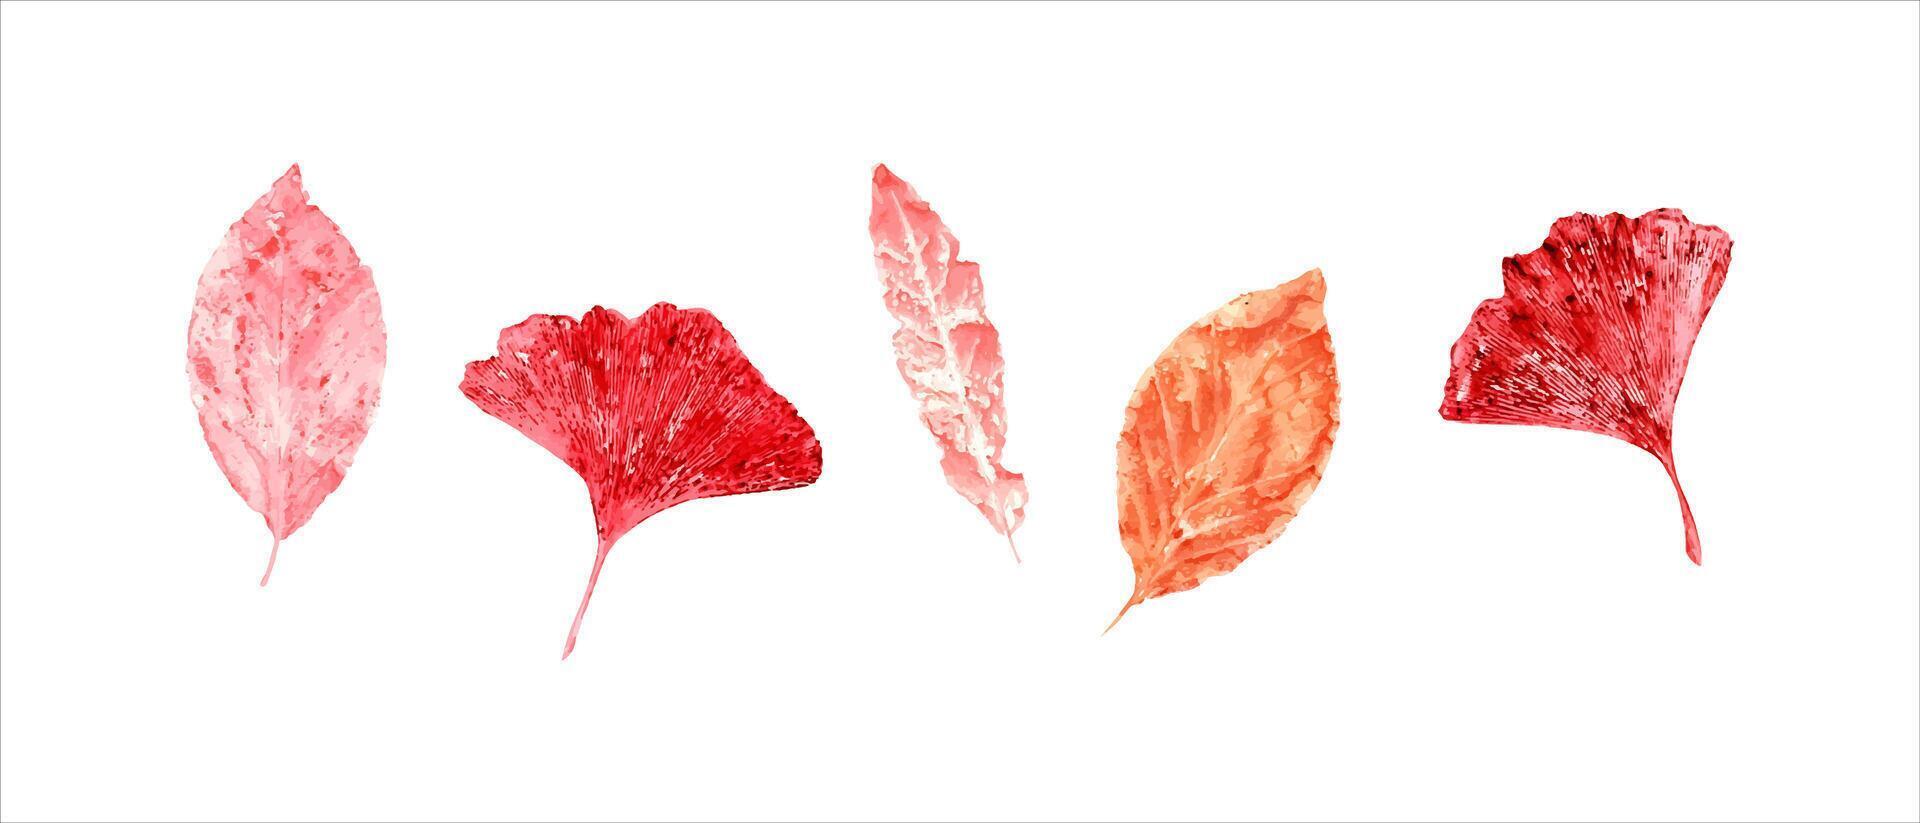 Set of autumn red pink leaves. Abstract leaf imprints. Fall dry leaves. Watercolor illustration of colorful leaf silhouettes for posters, texture, frame, cards vector